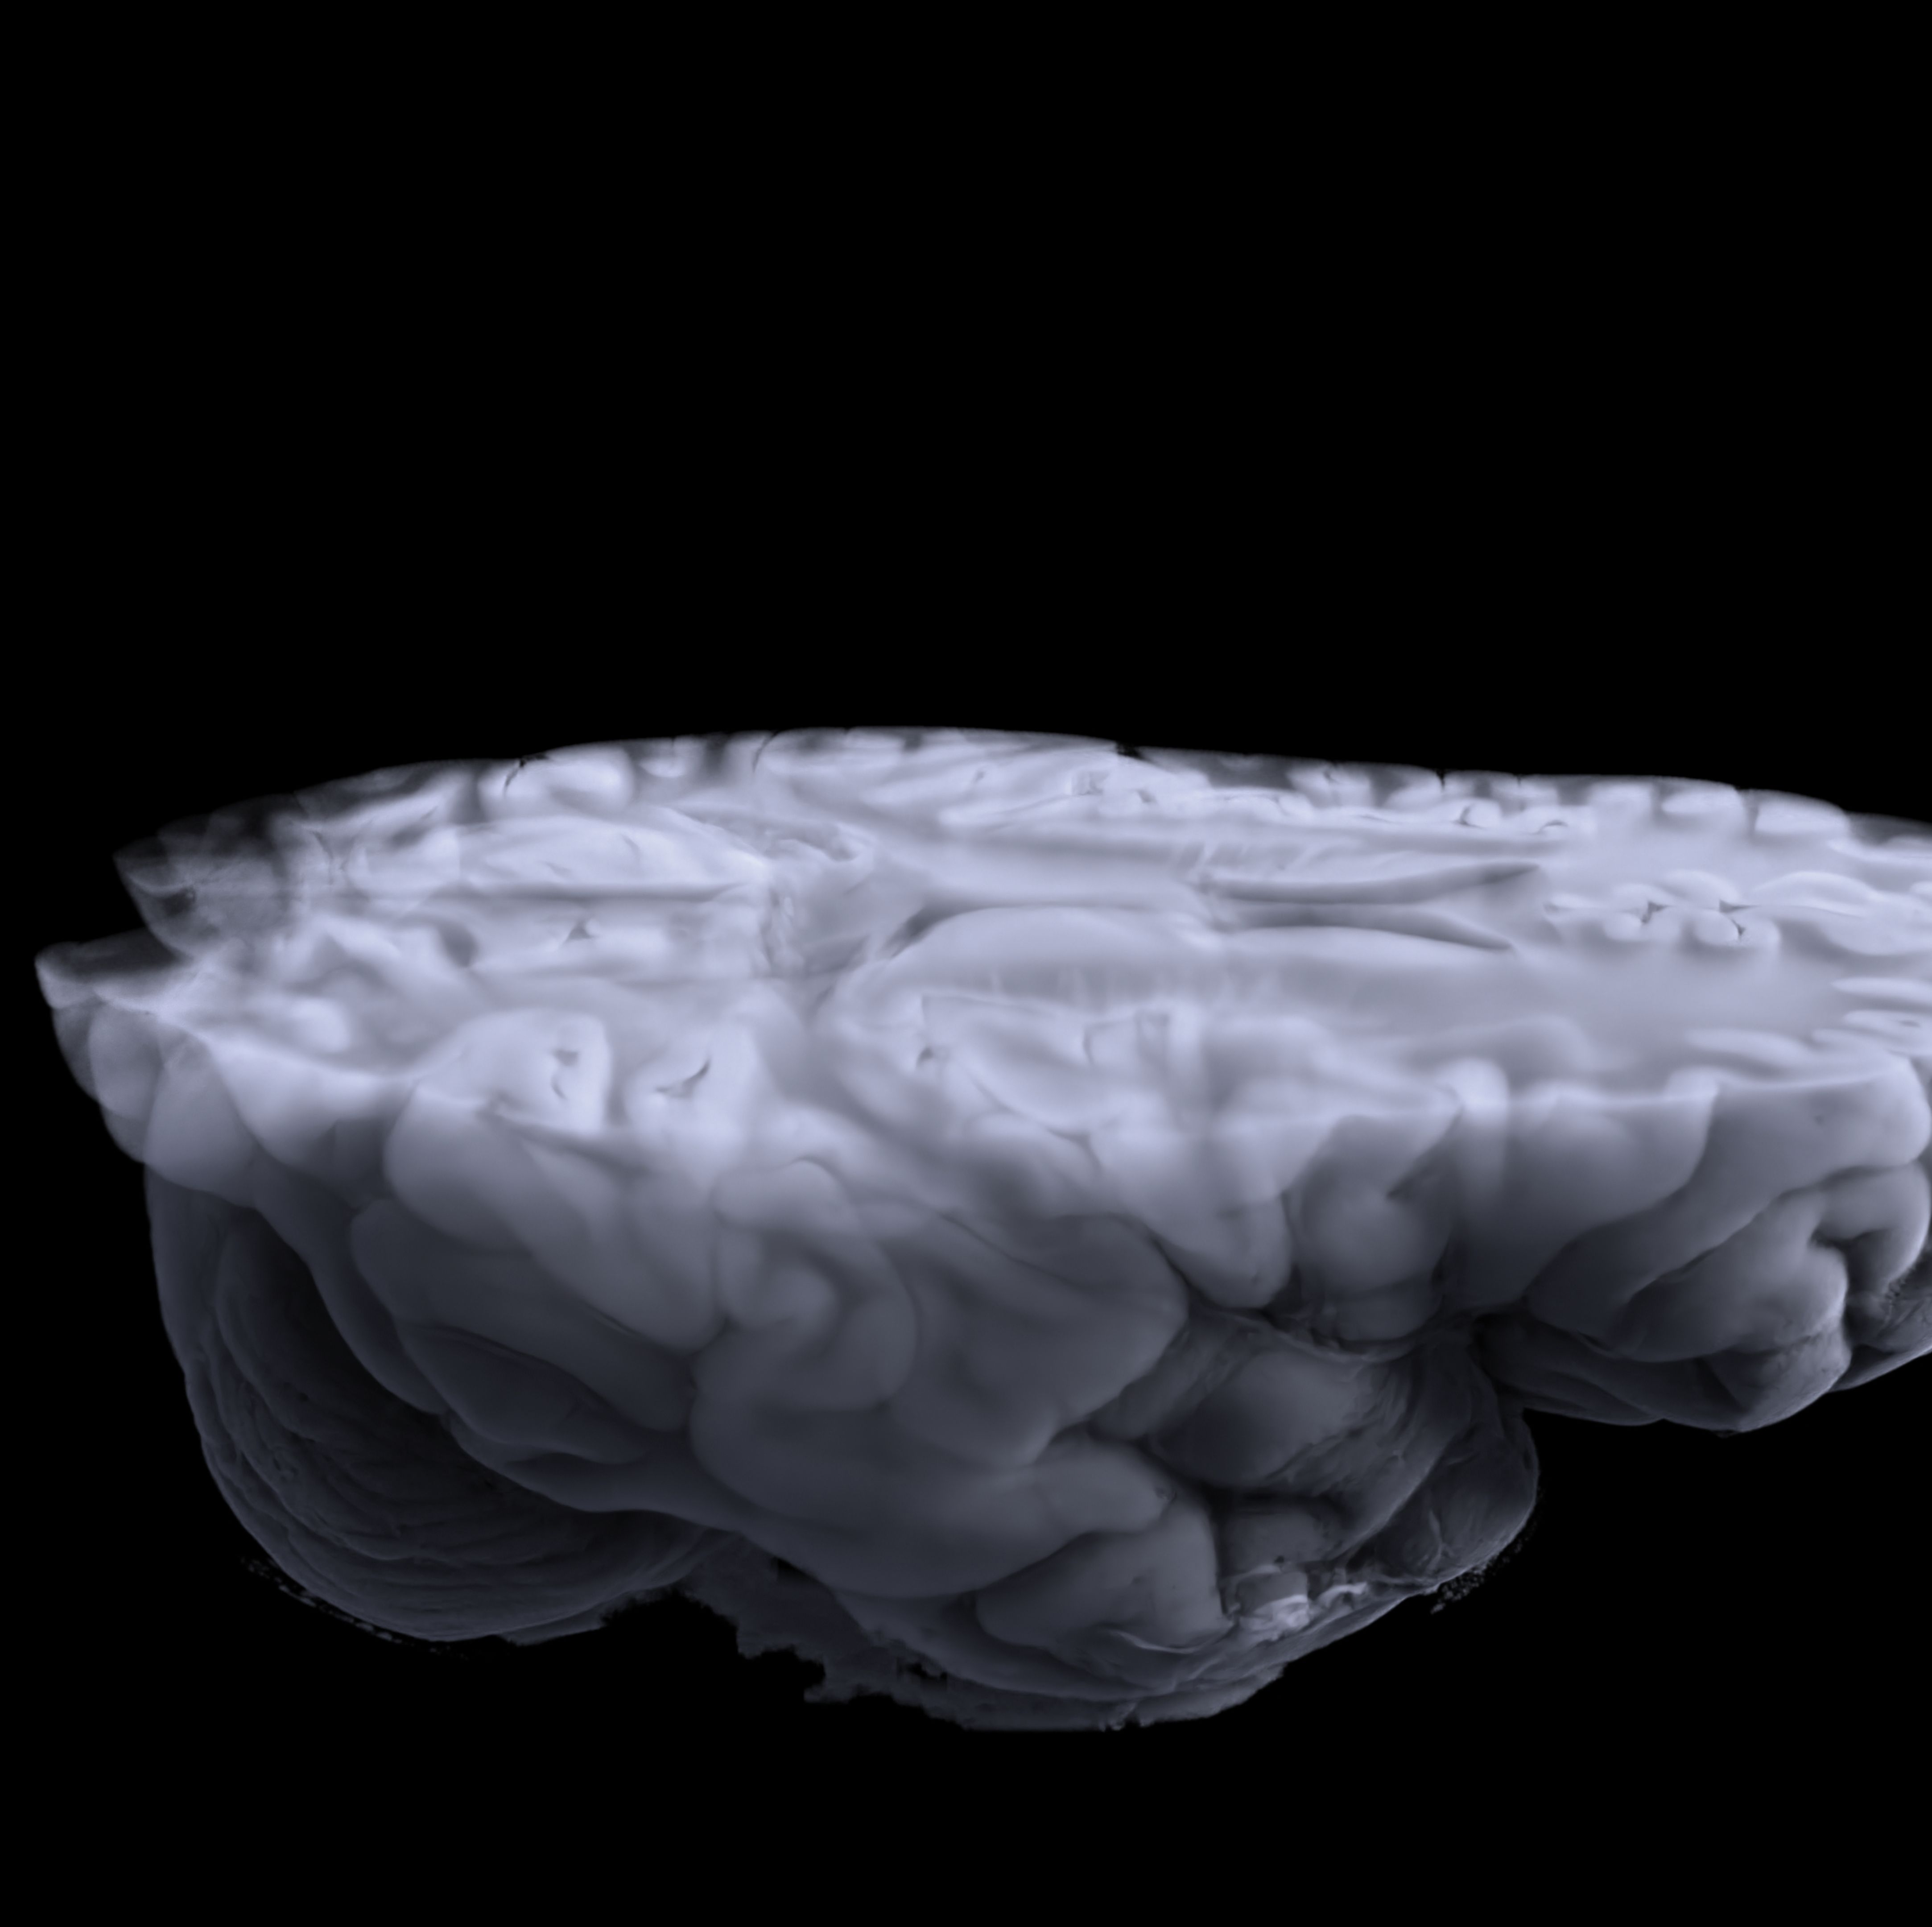 Human Brains Have Gotten Astonishingly Bigger Over the Last 75 Years